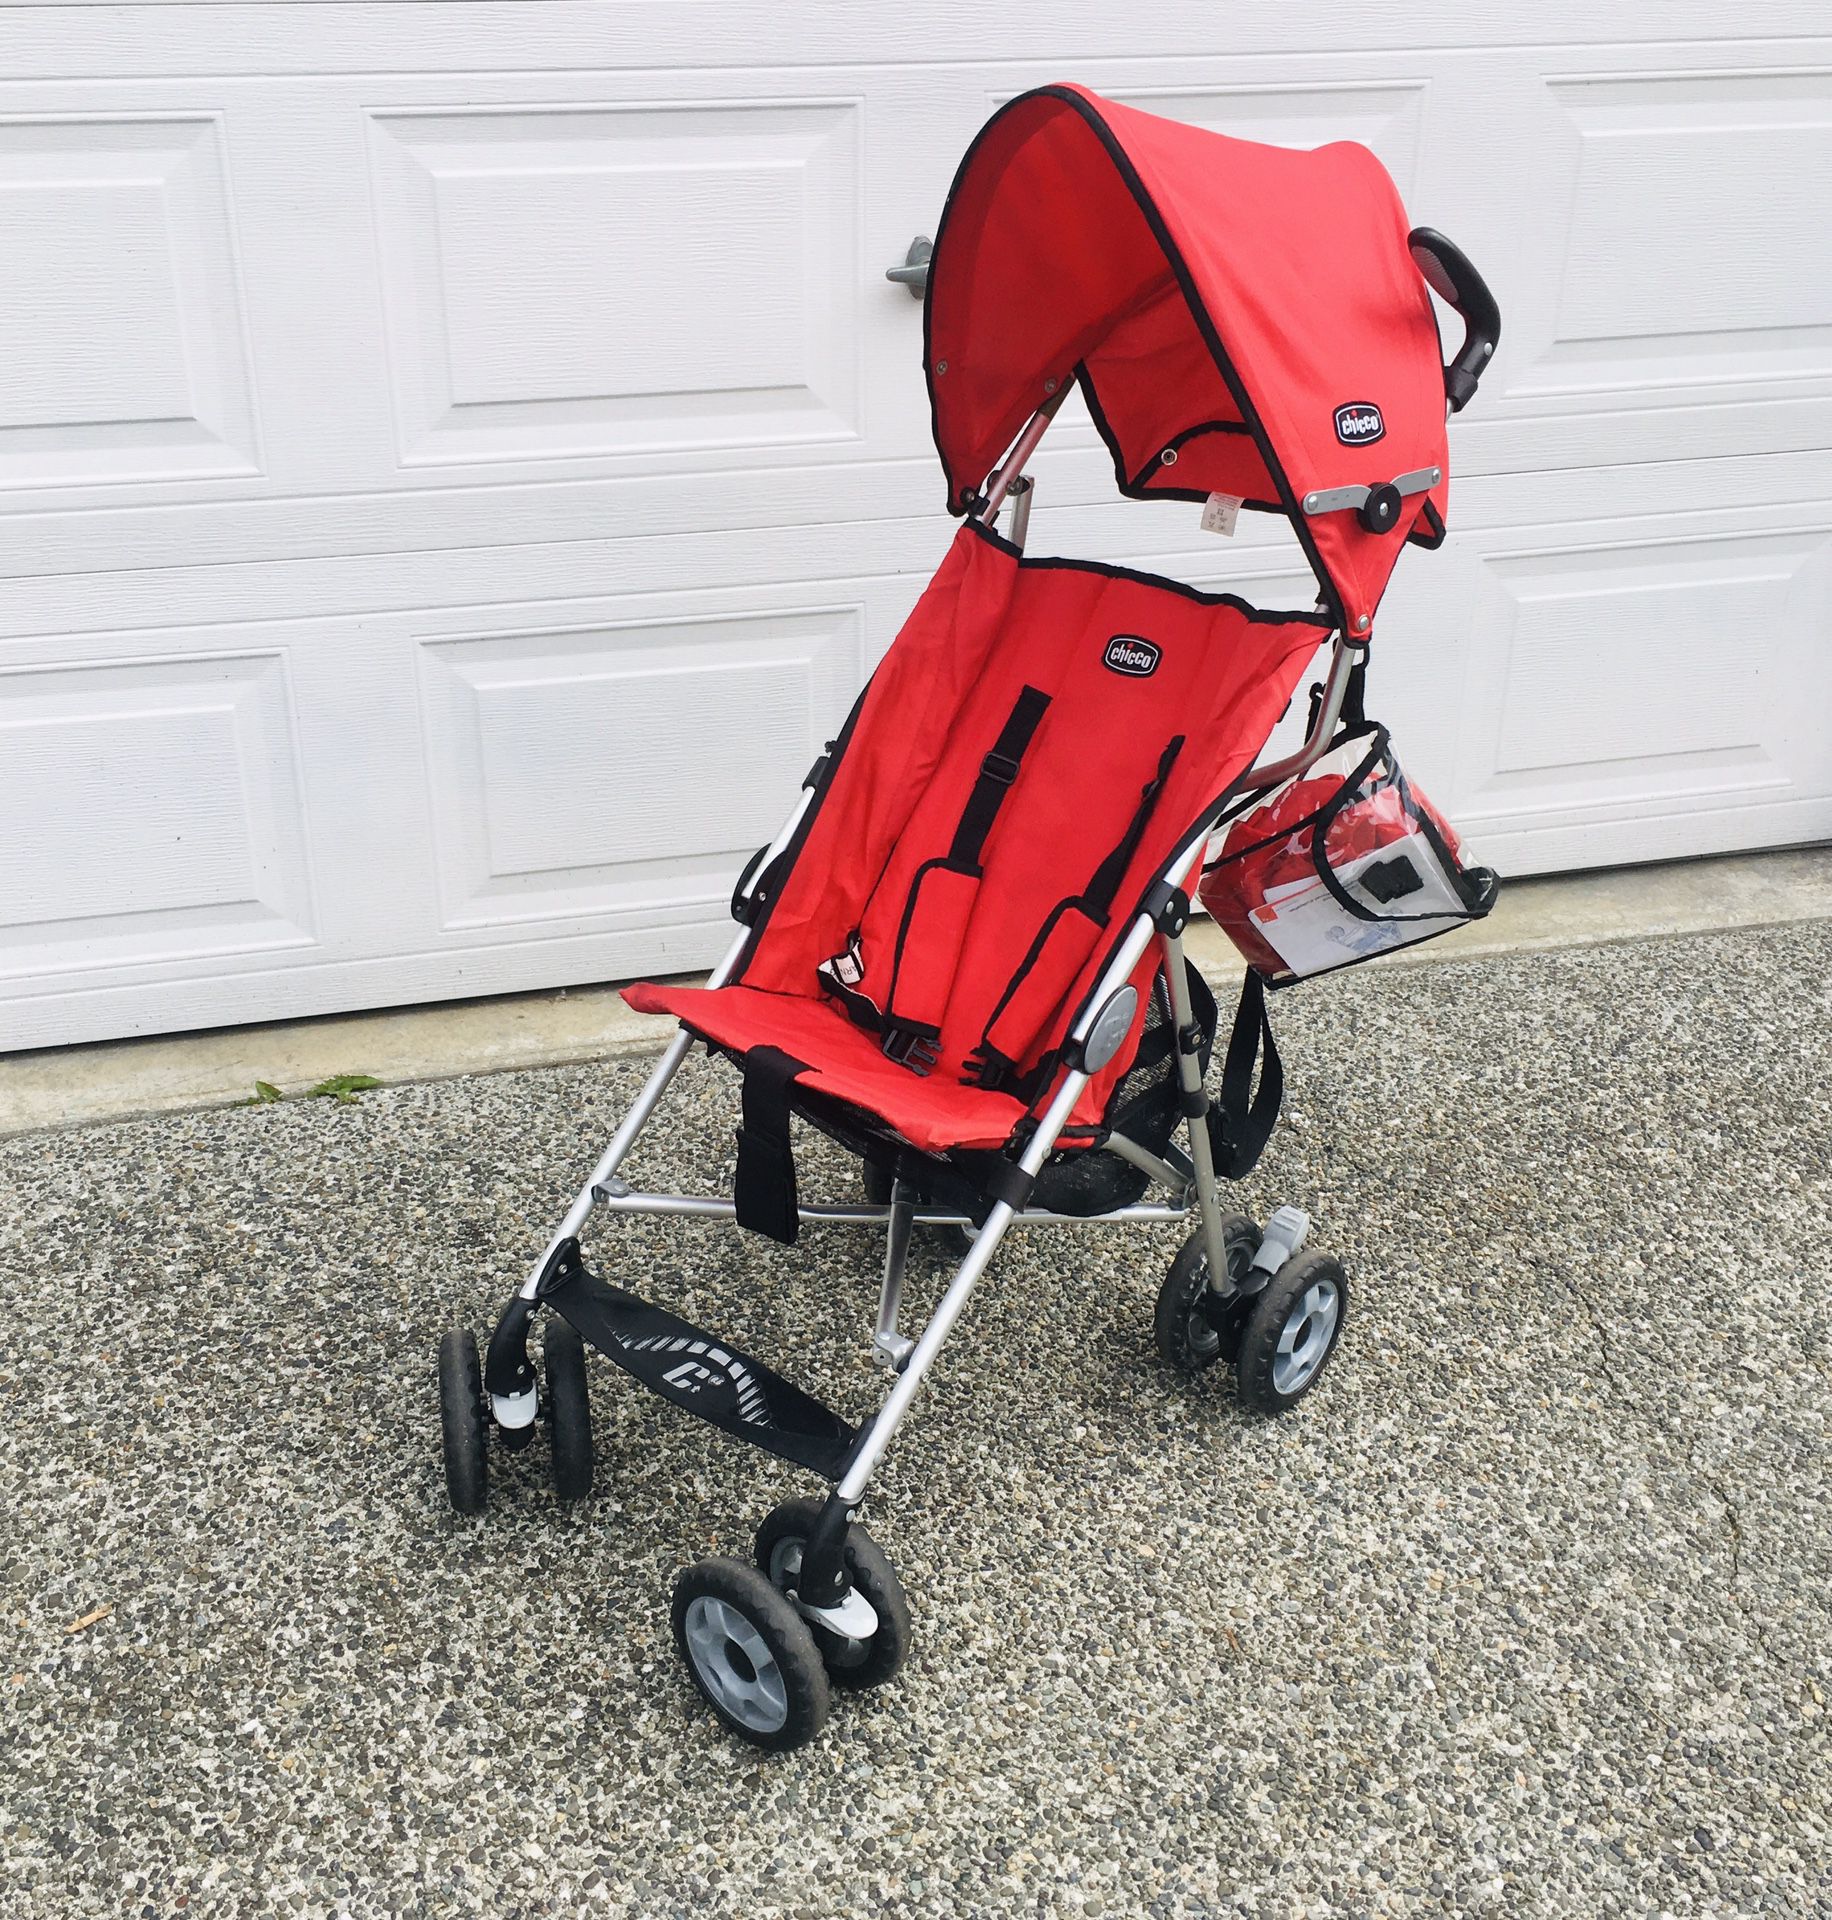 Chicco Capri lite weight packable stroller with rain cover $25